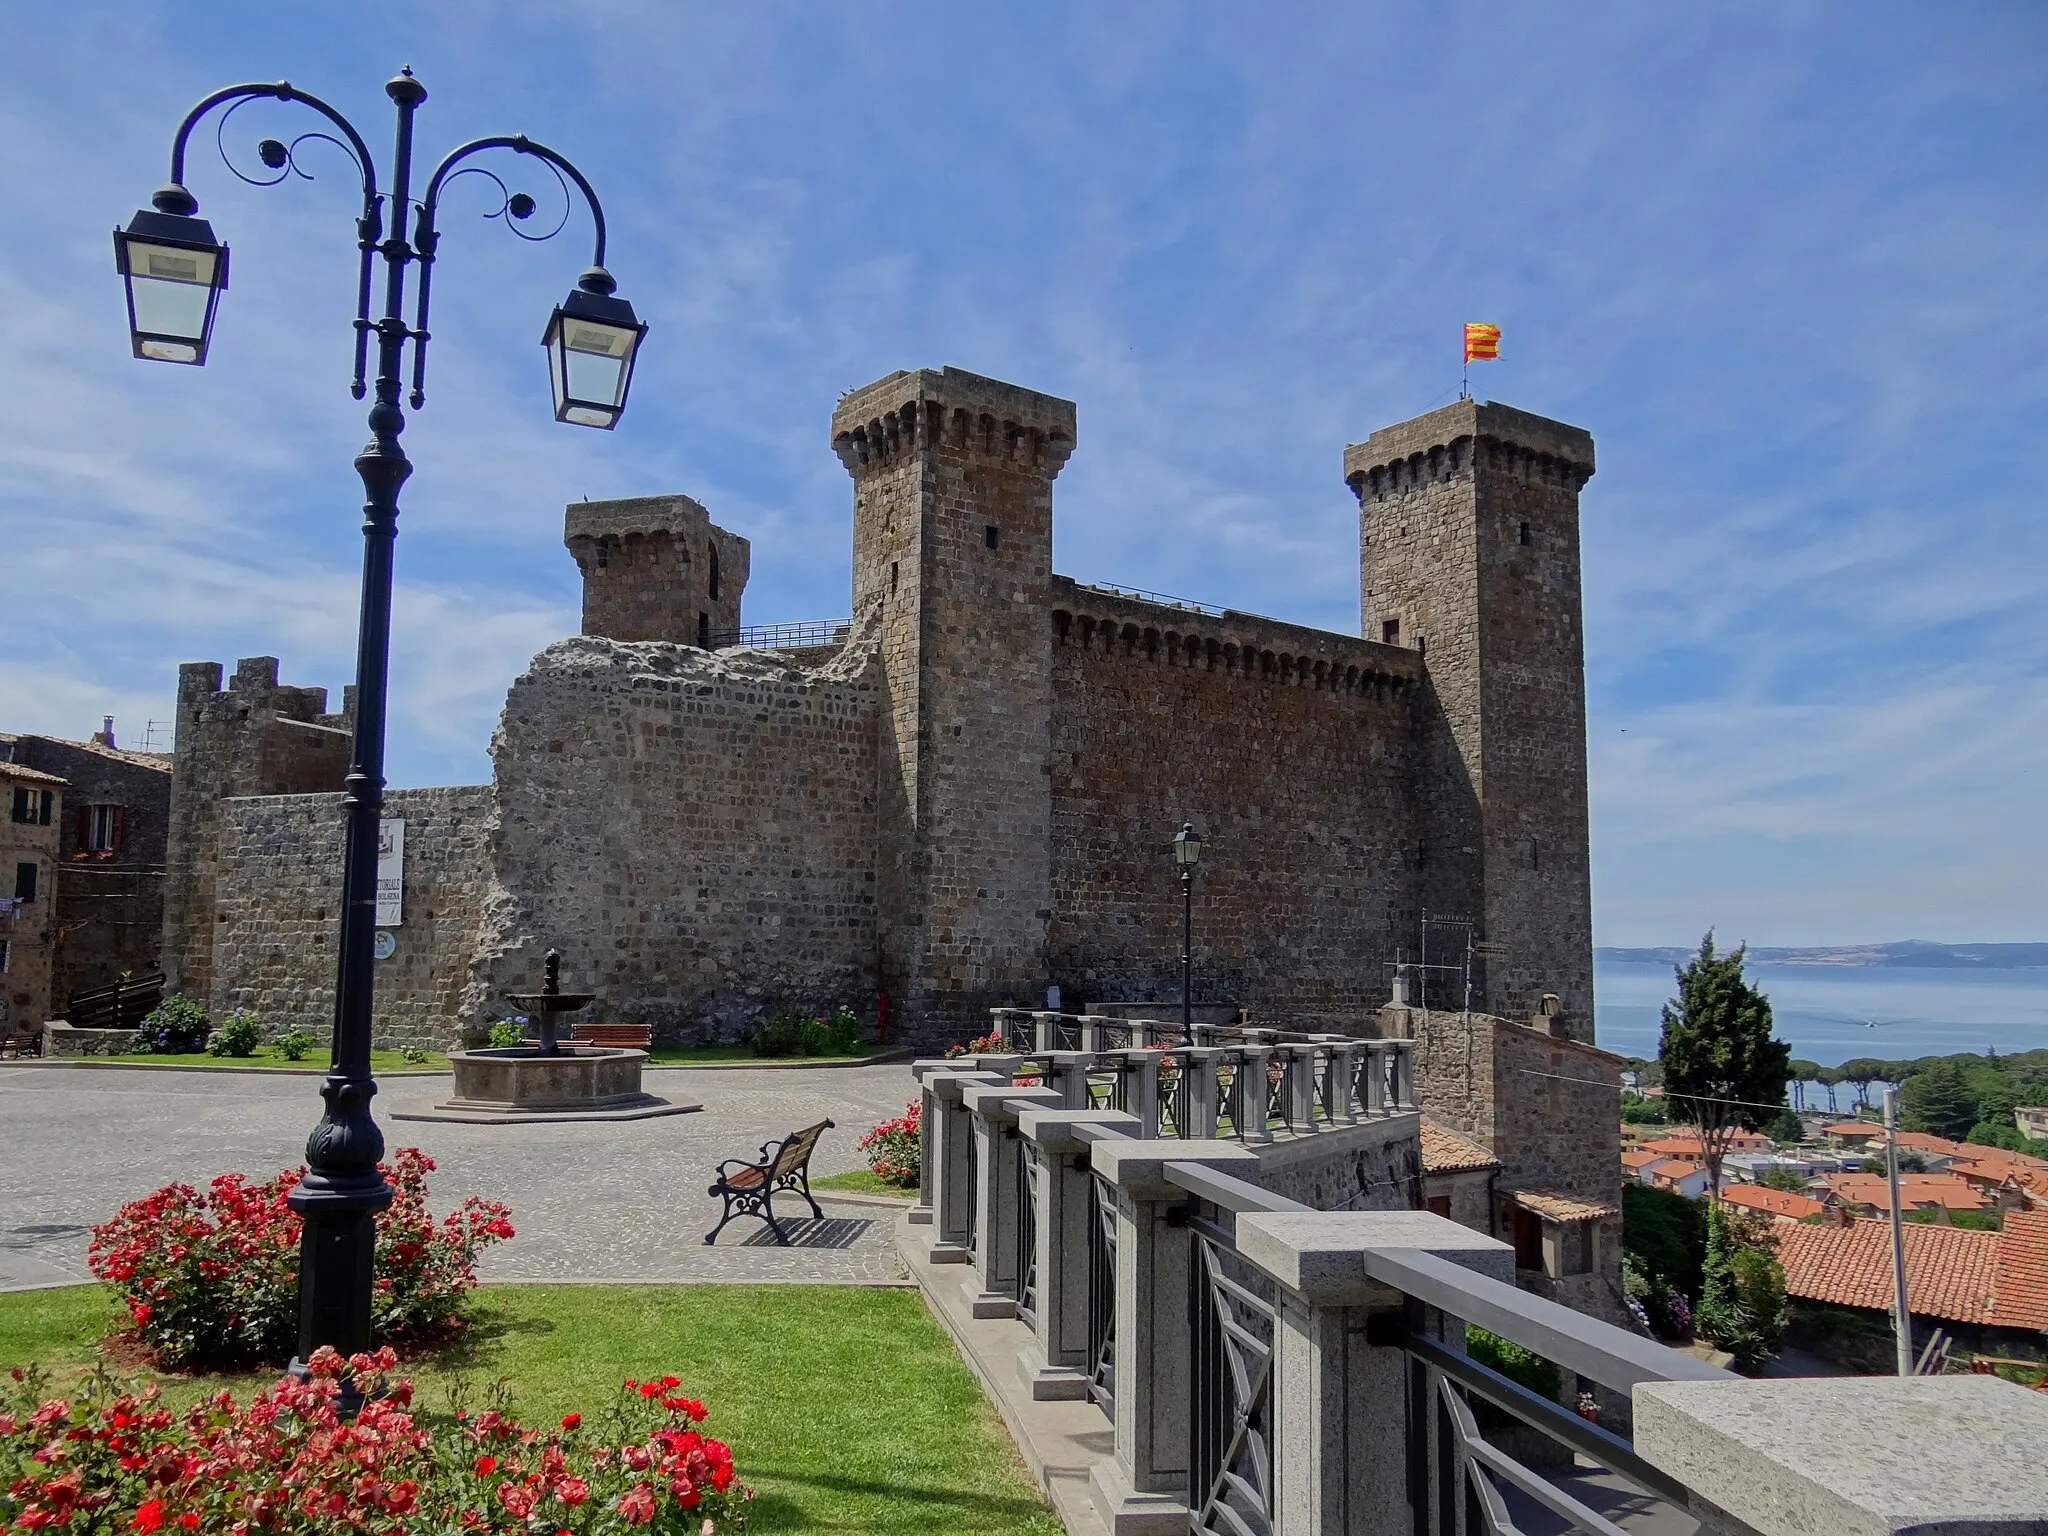 Photo showing: The Castle of Bolsena as seen from the Via Francigena just as it enters the town.